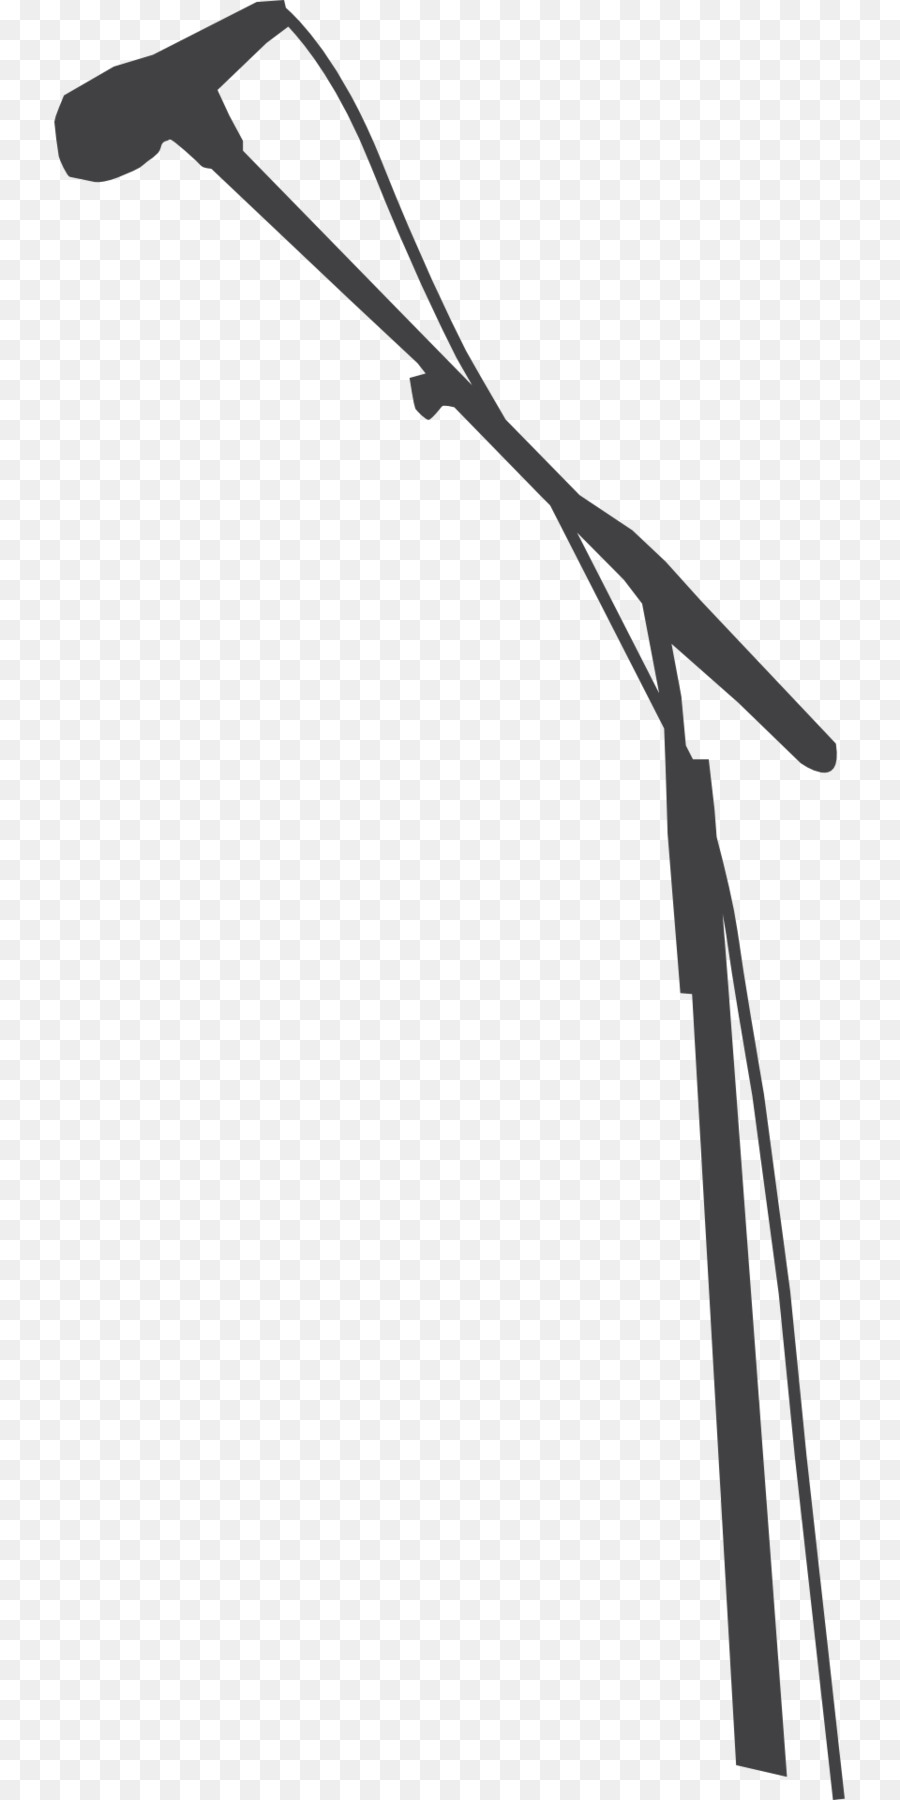 Microphone Stands Silhouette Drawing - Mike png download - 960*1920 - Free Transparent  png Download.